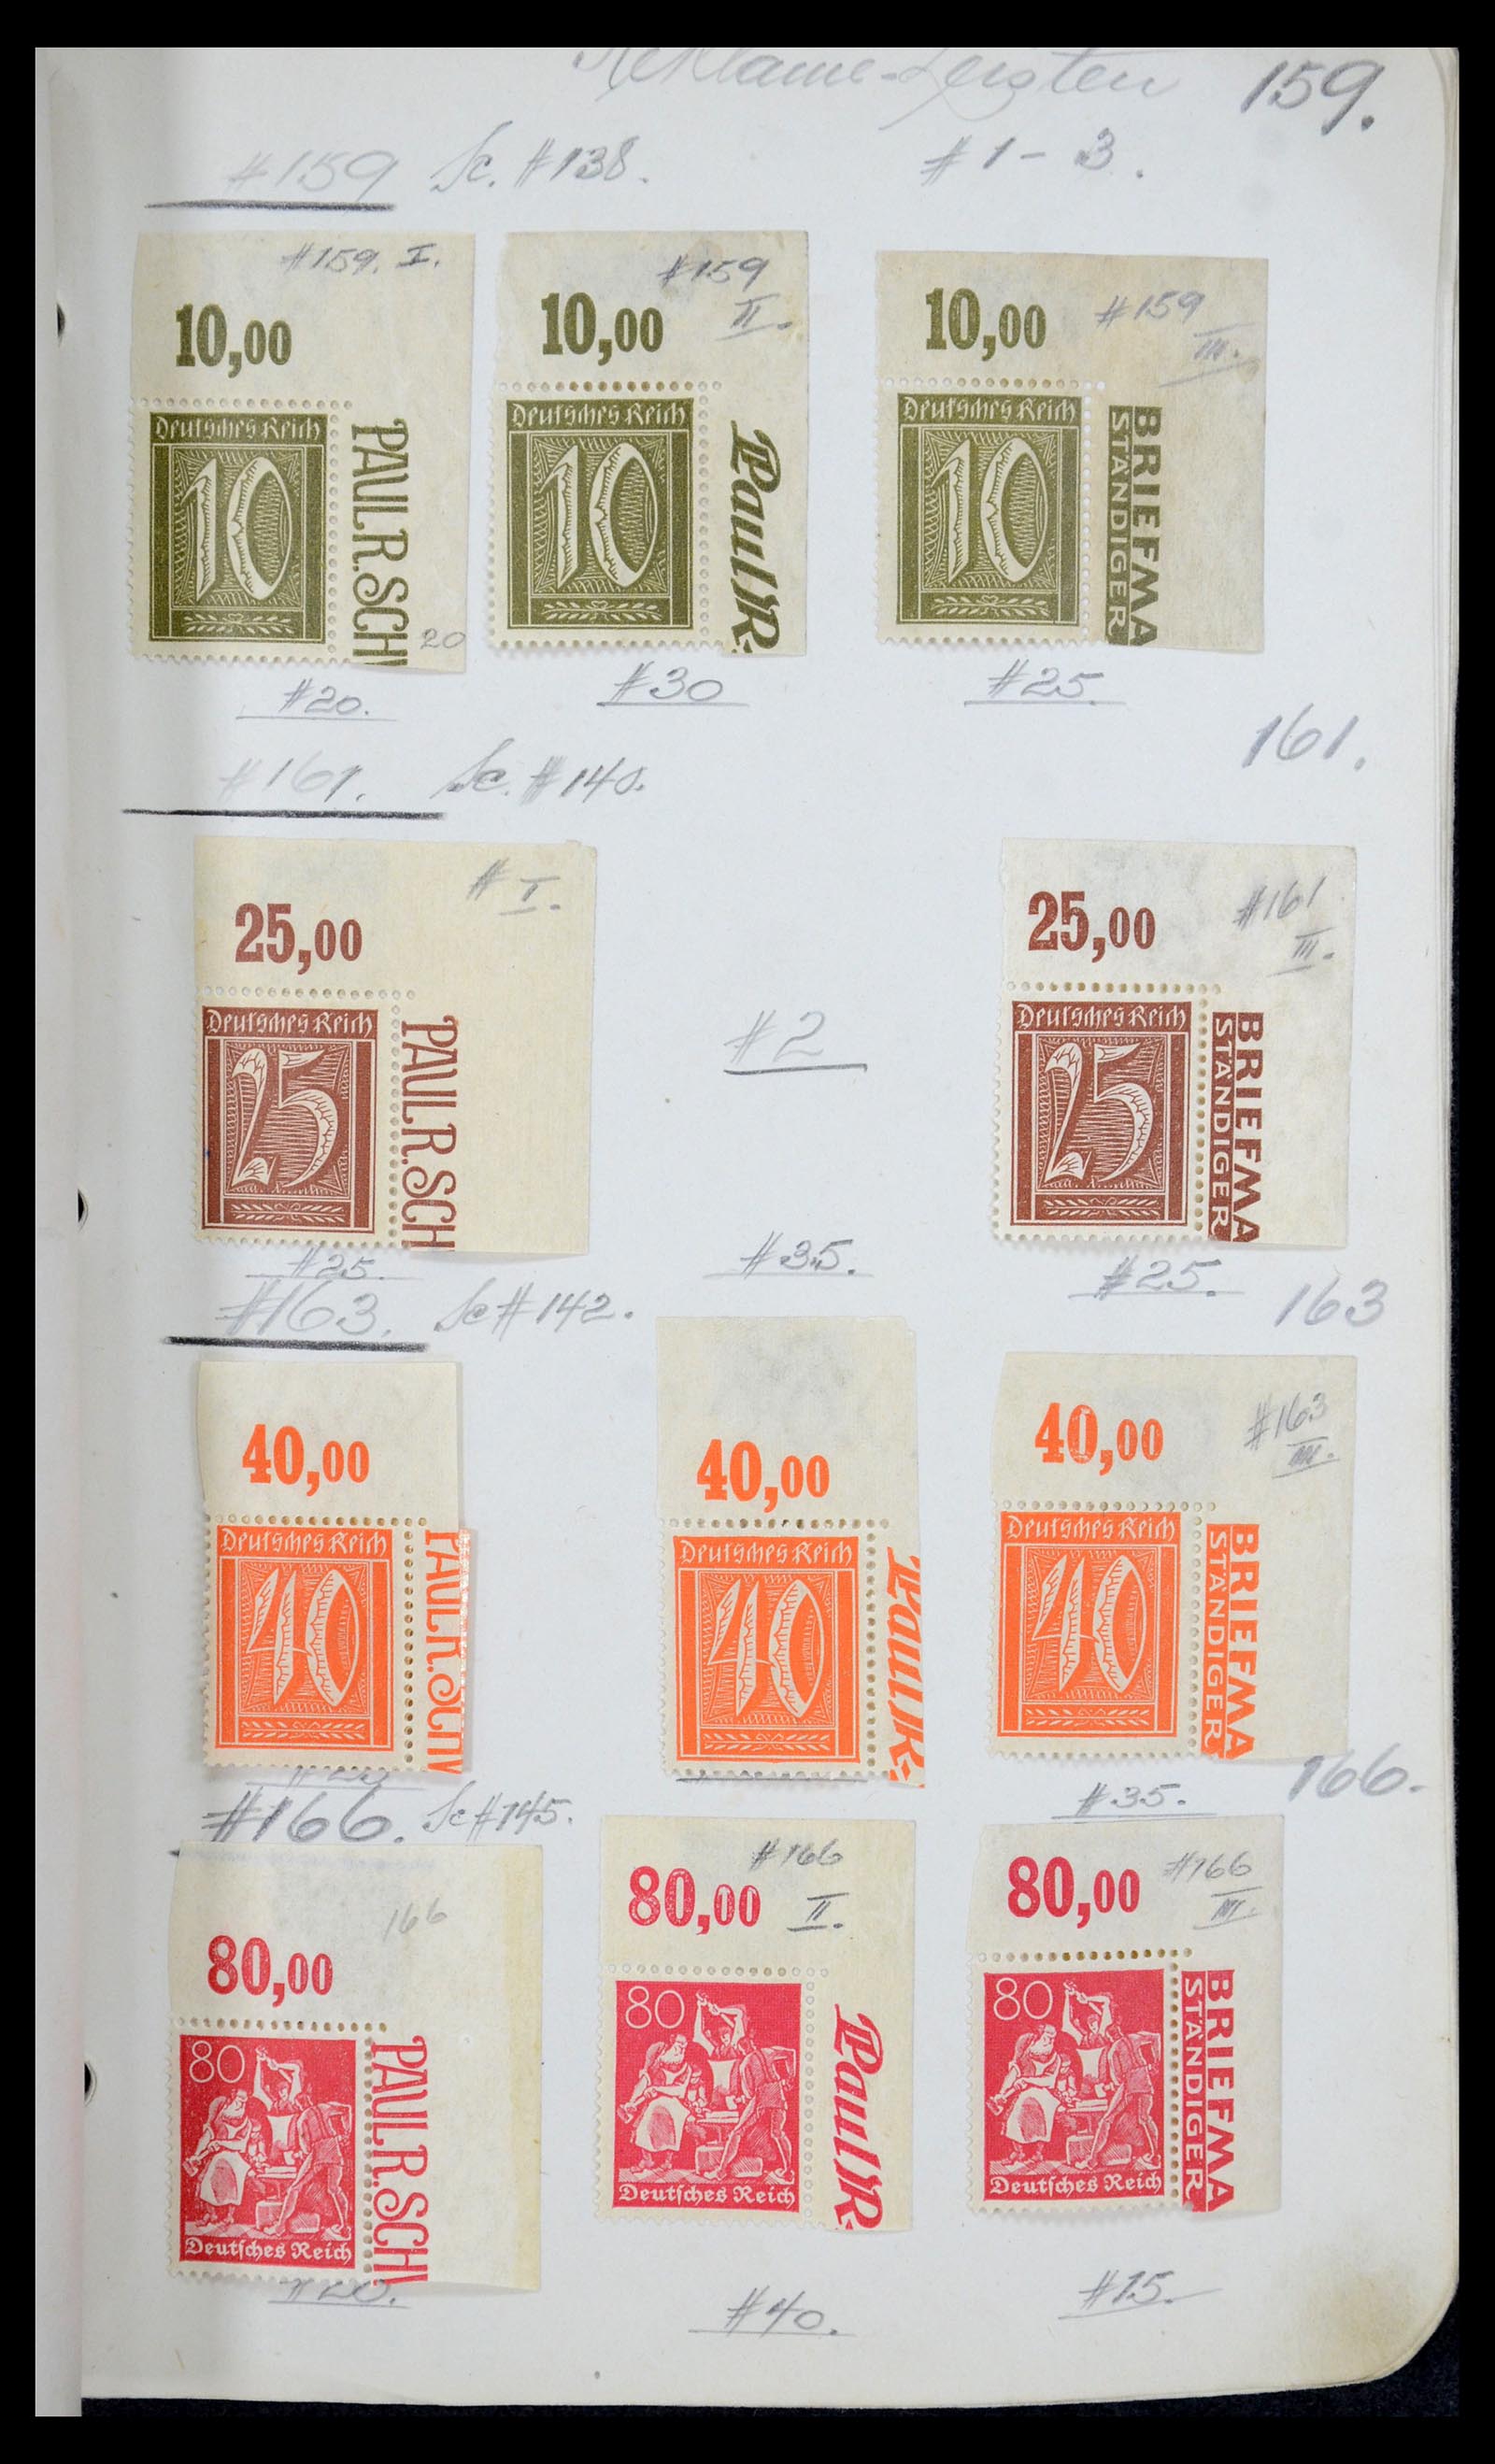 35565 001 - Stamp Collection 35565 German Reich infla 1919-1923.